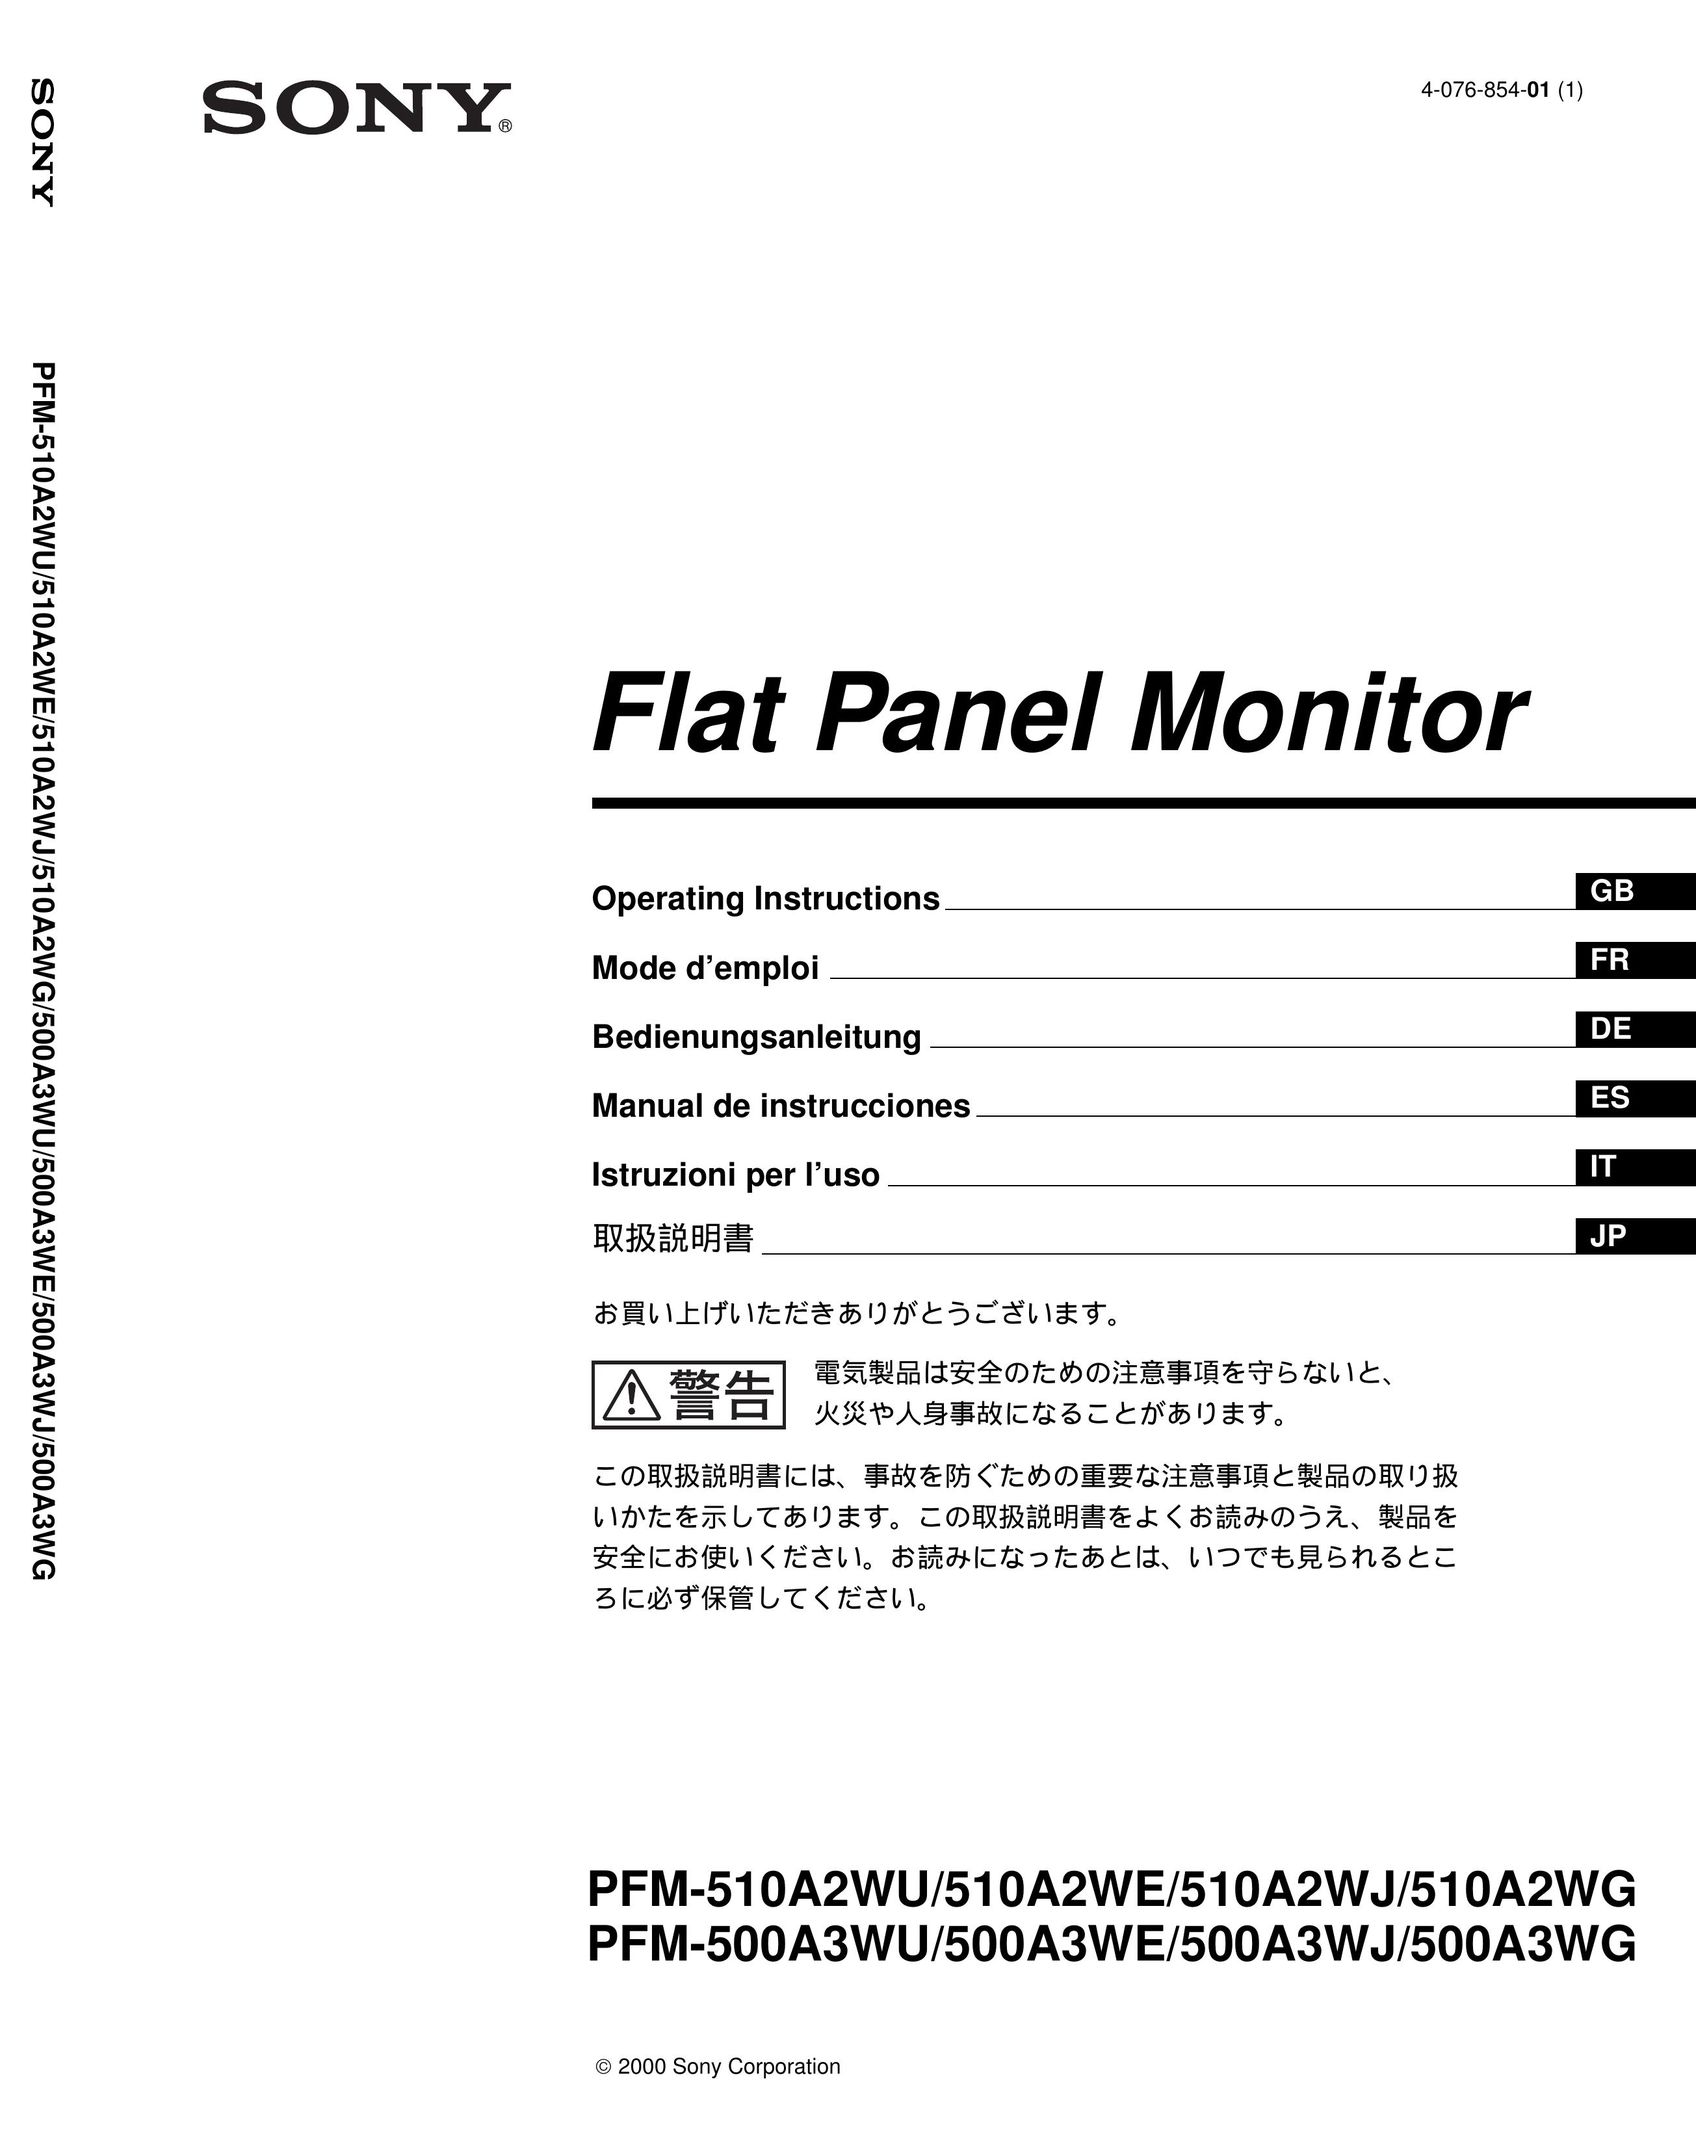 Sony 500A3WG Computer Monitor User Manual